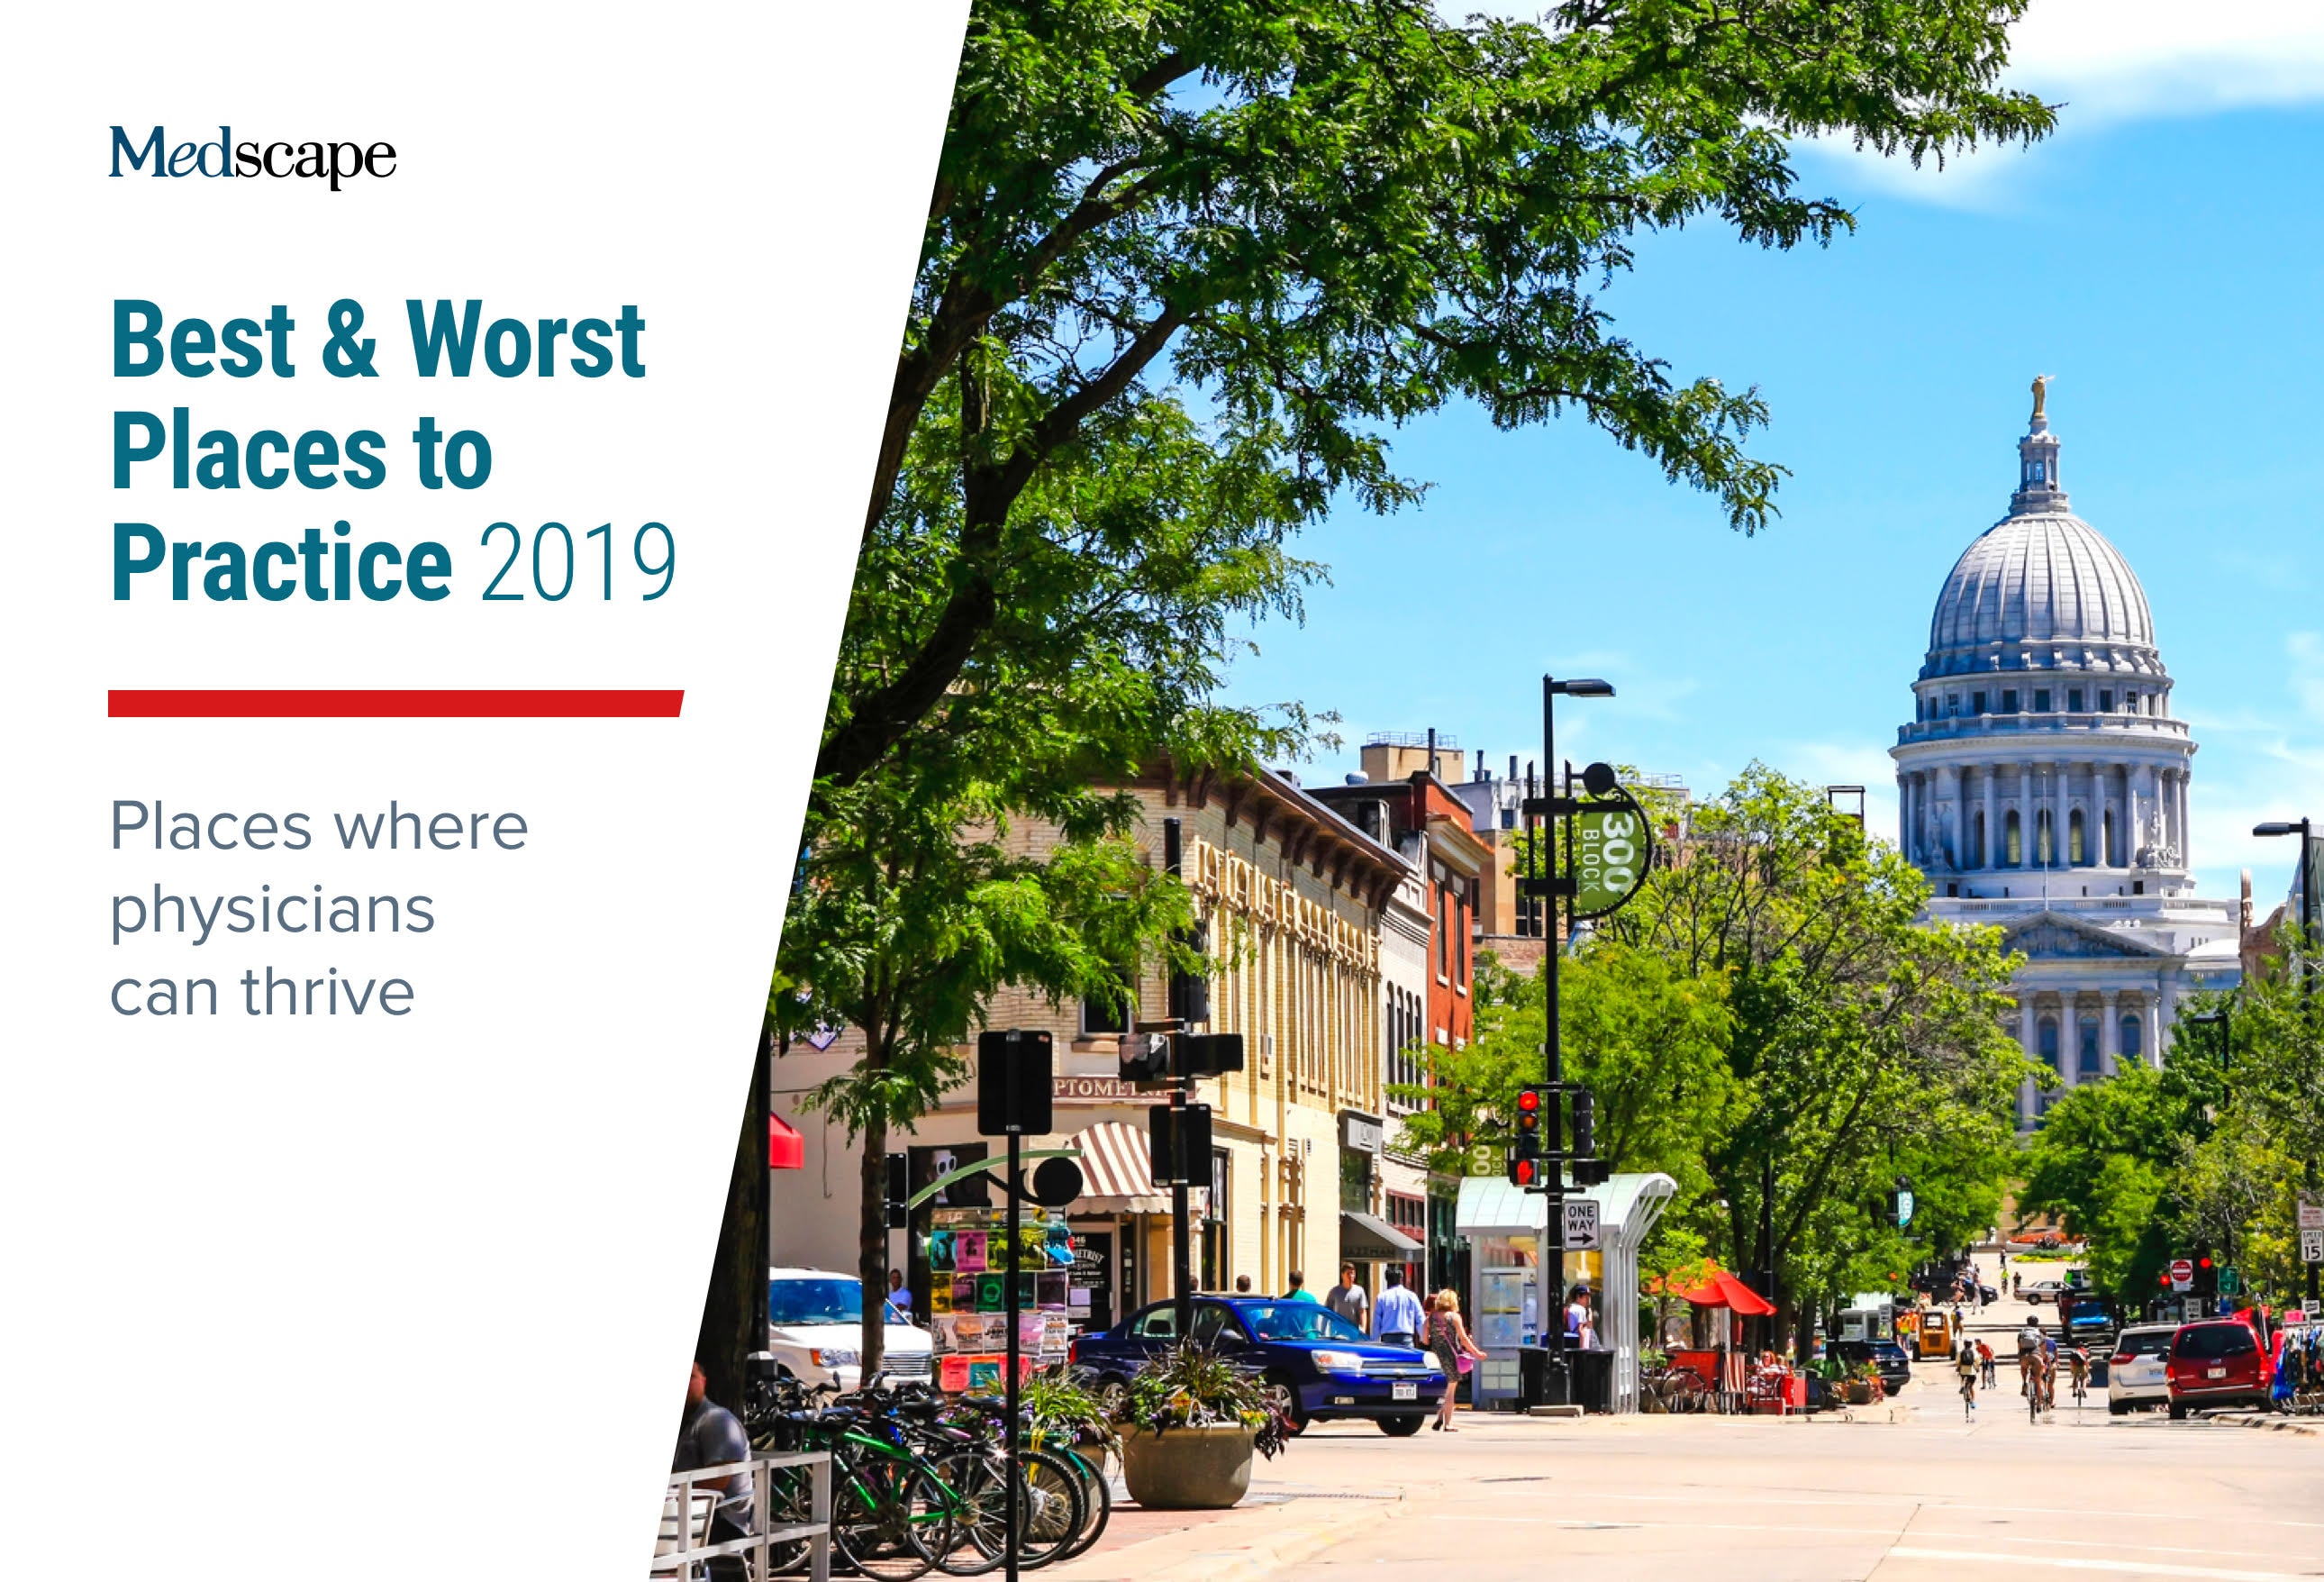 Best & Worst Places to Practice 2019